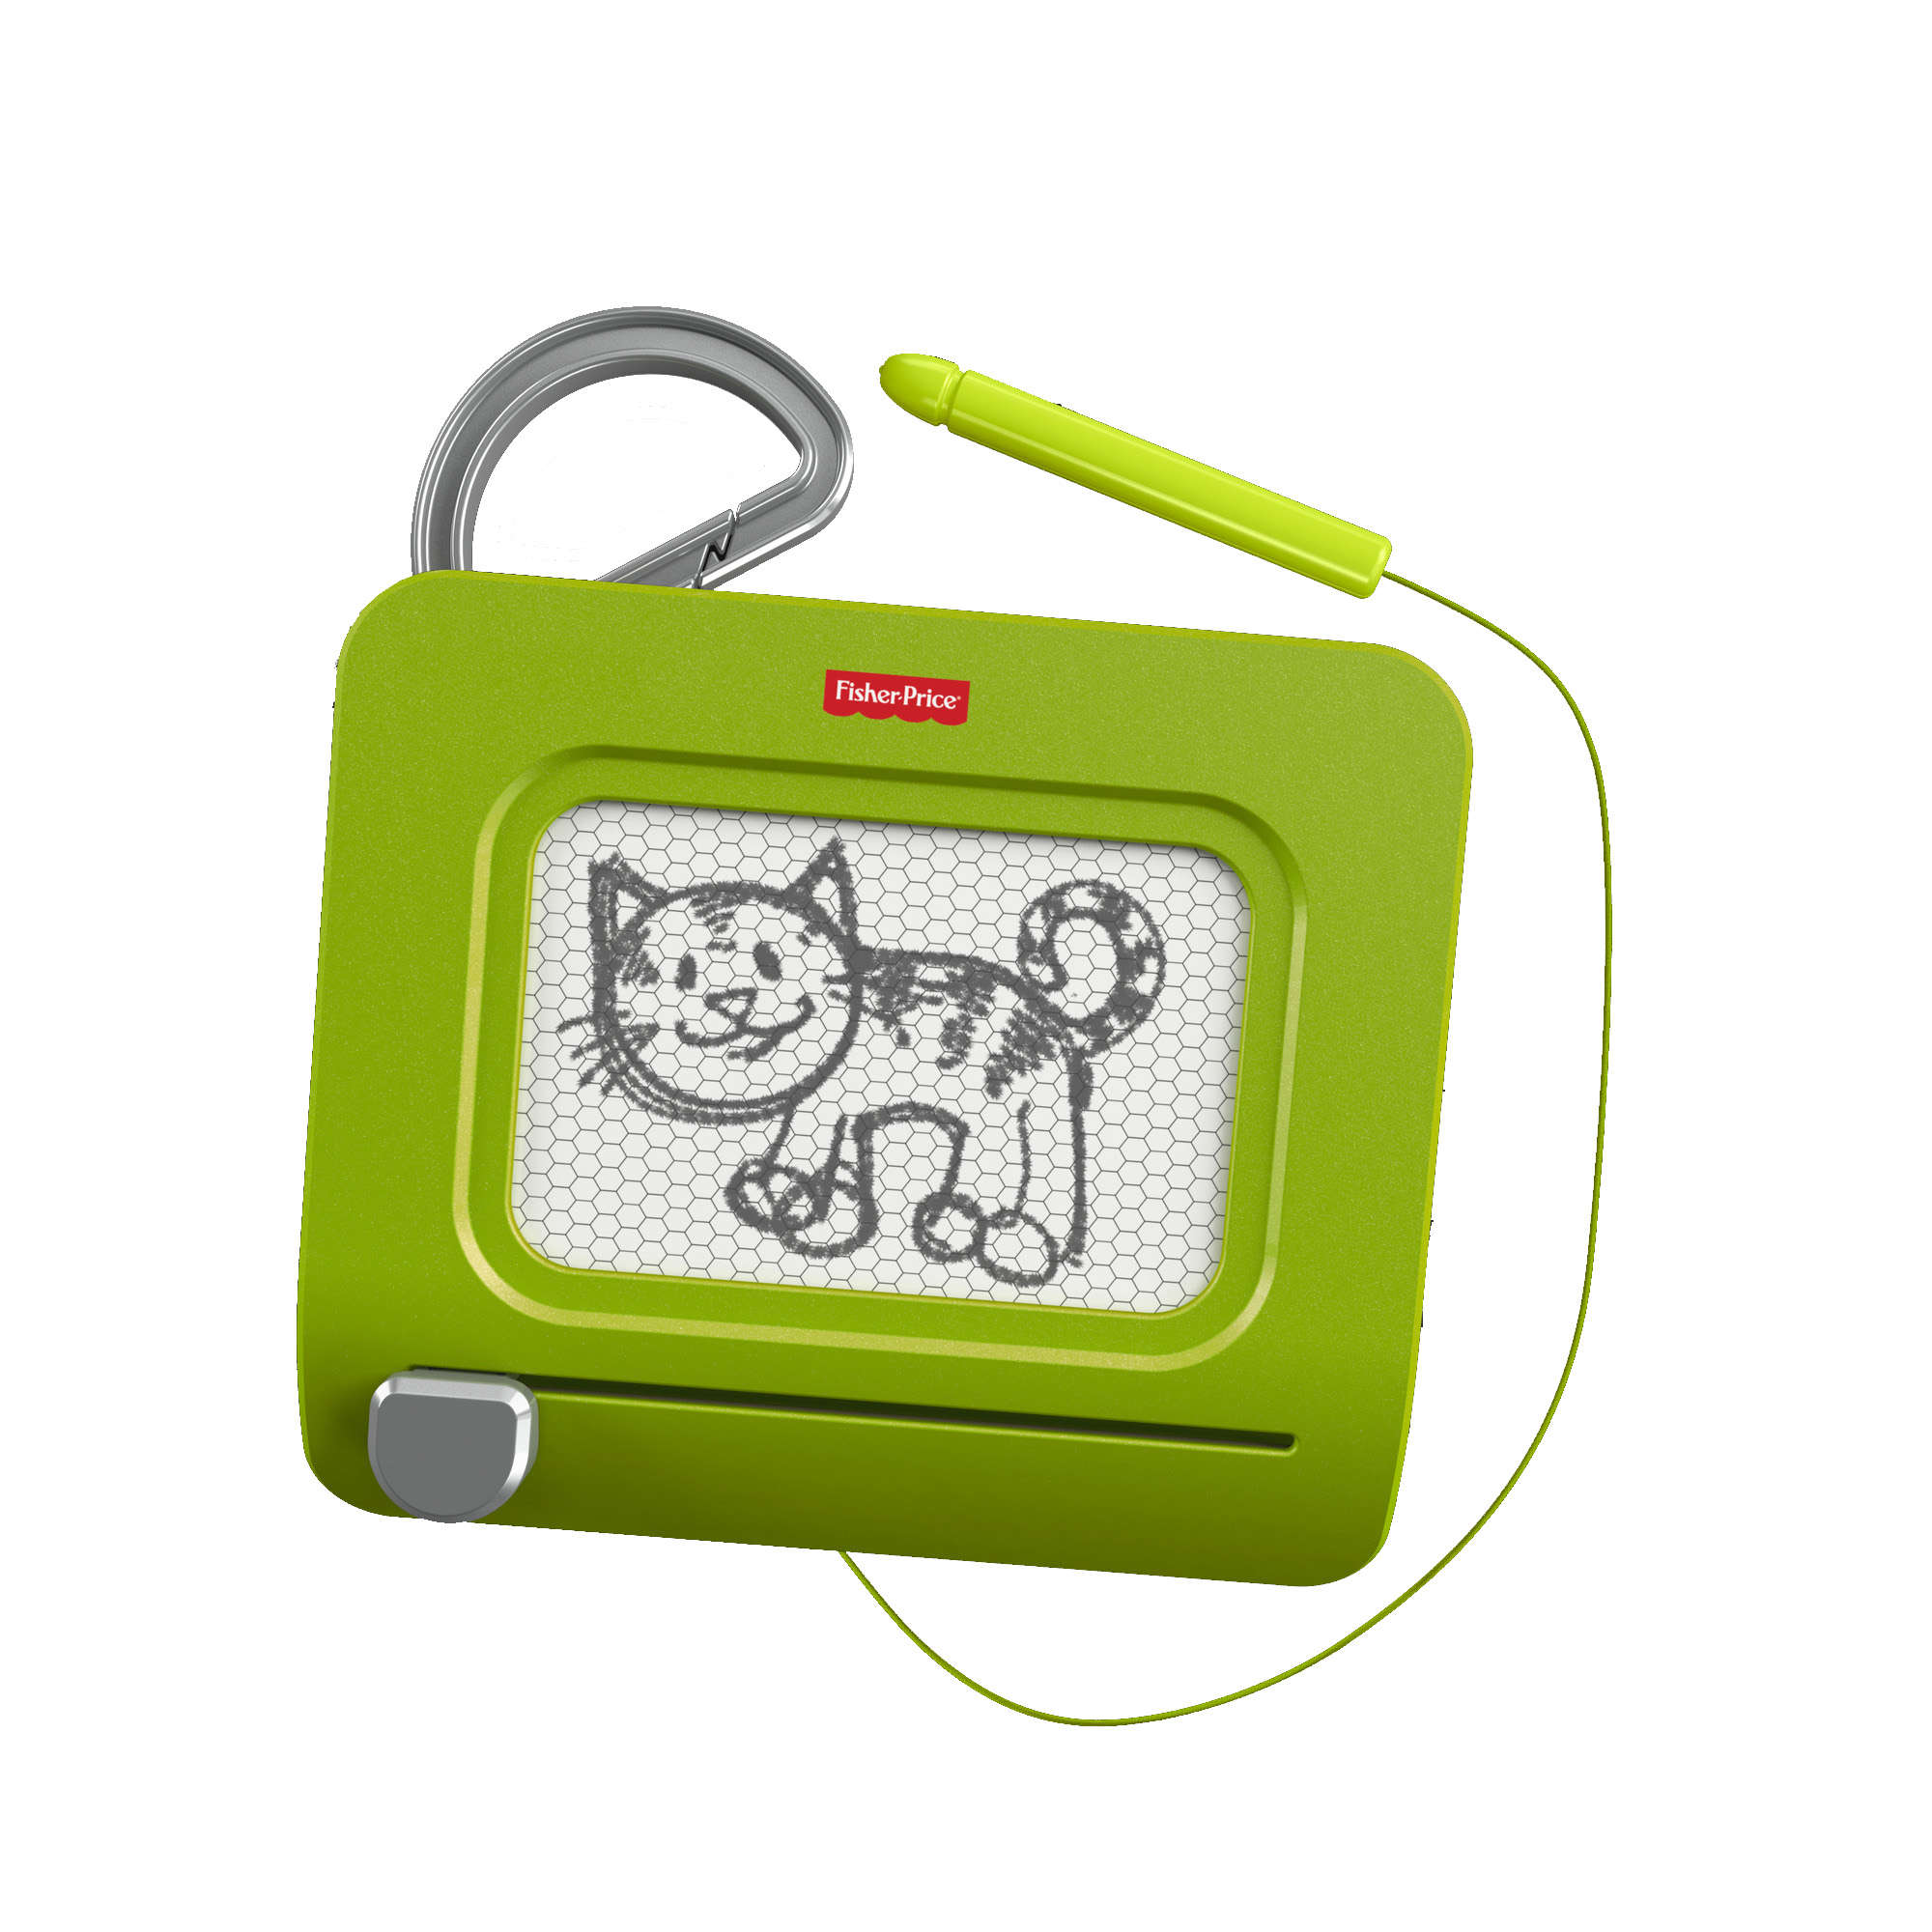 Fisher-Price Doodle Pro Clip, Green - image 1 of 6